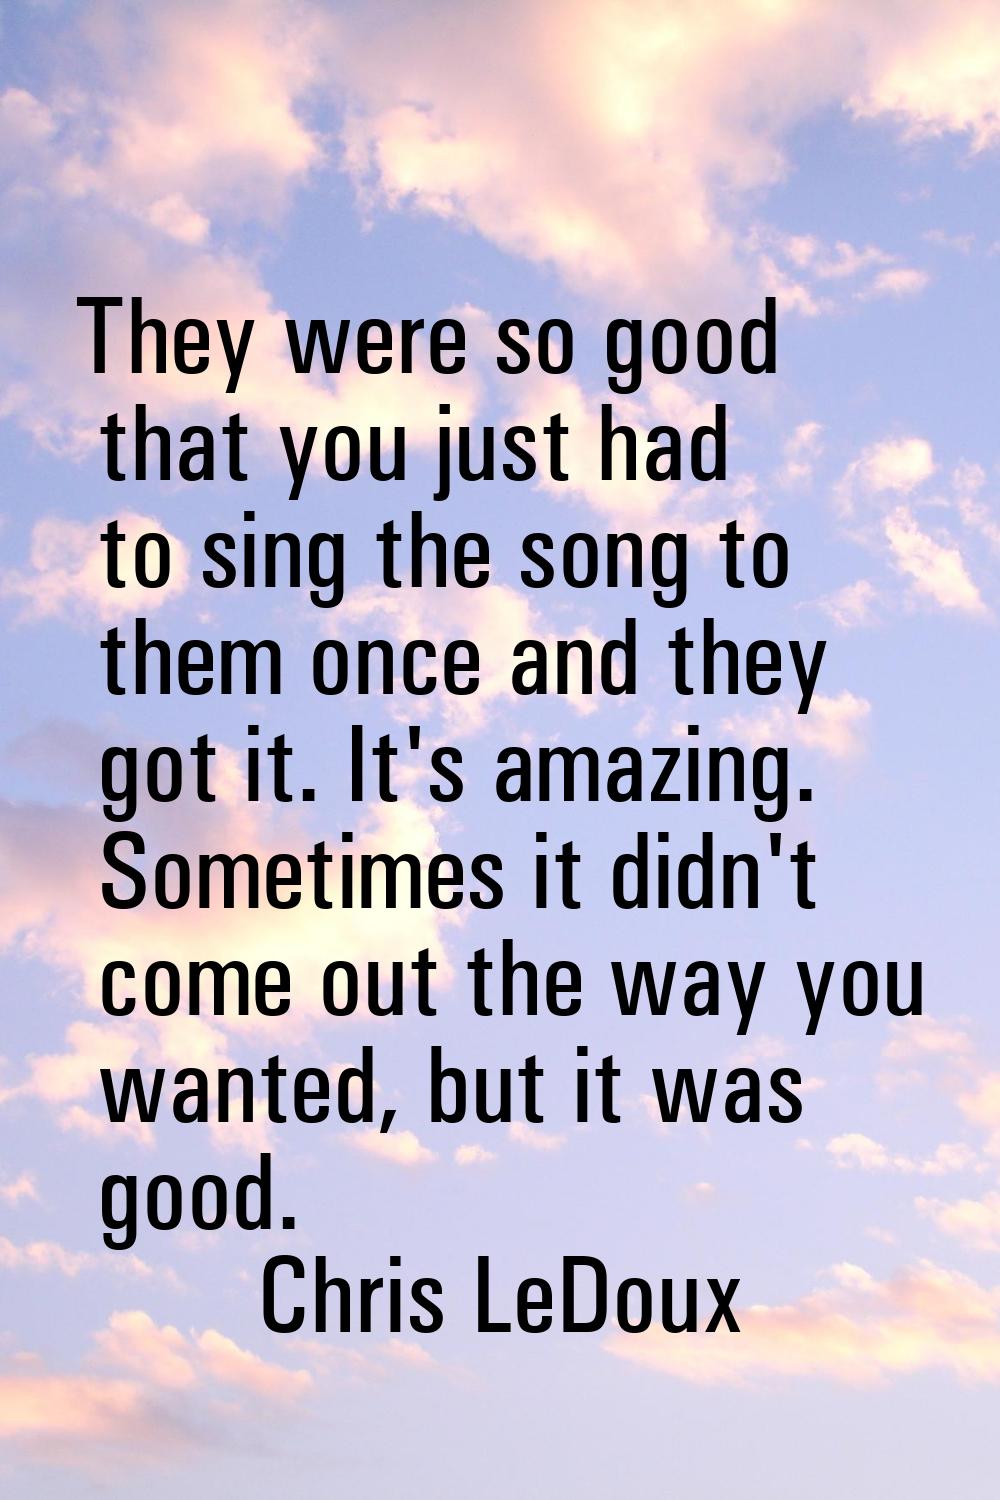 They were so good that you just had to sing the song to them once and they got it. It's amazing. So